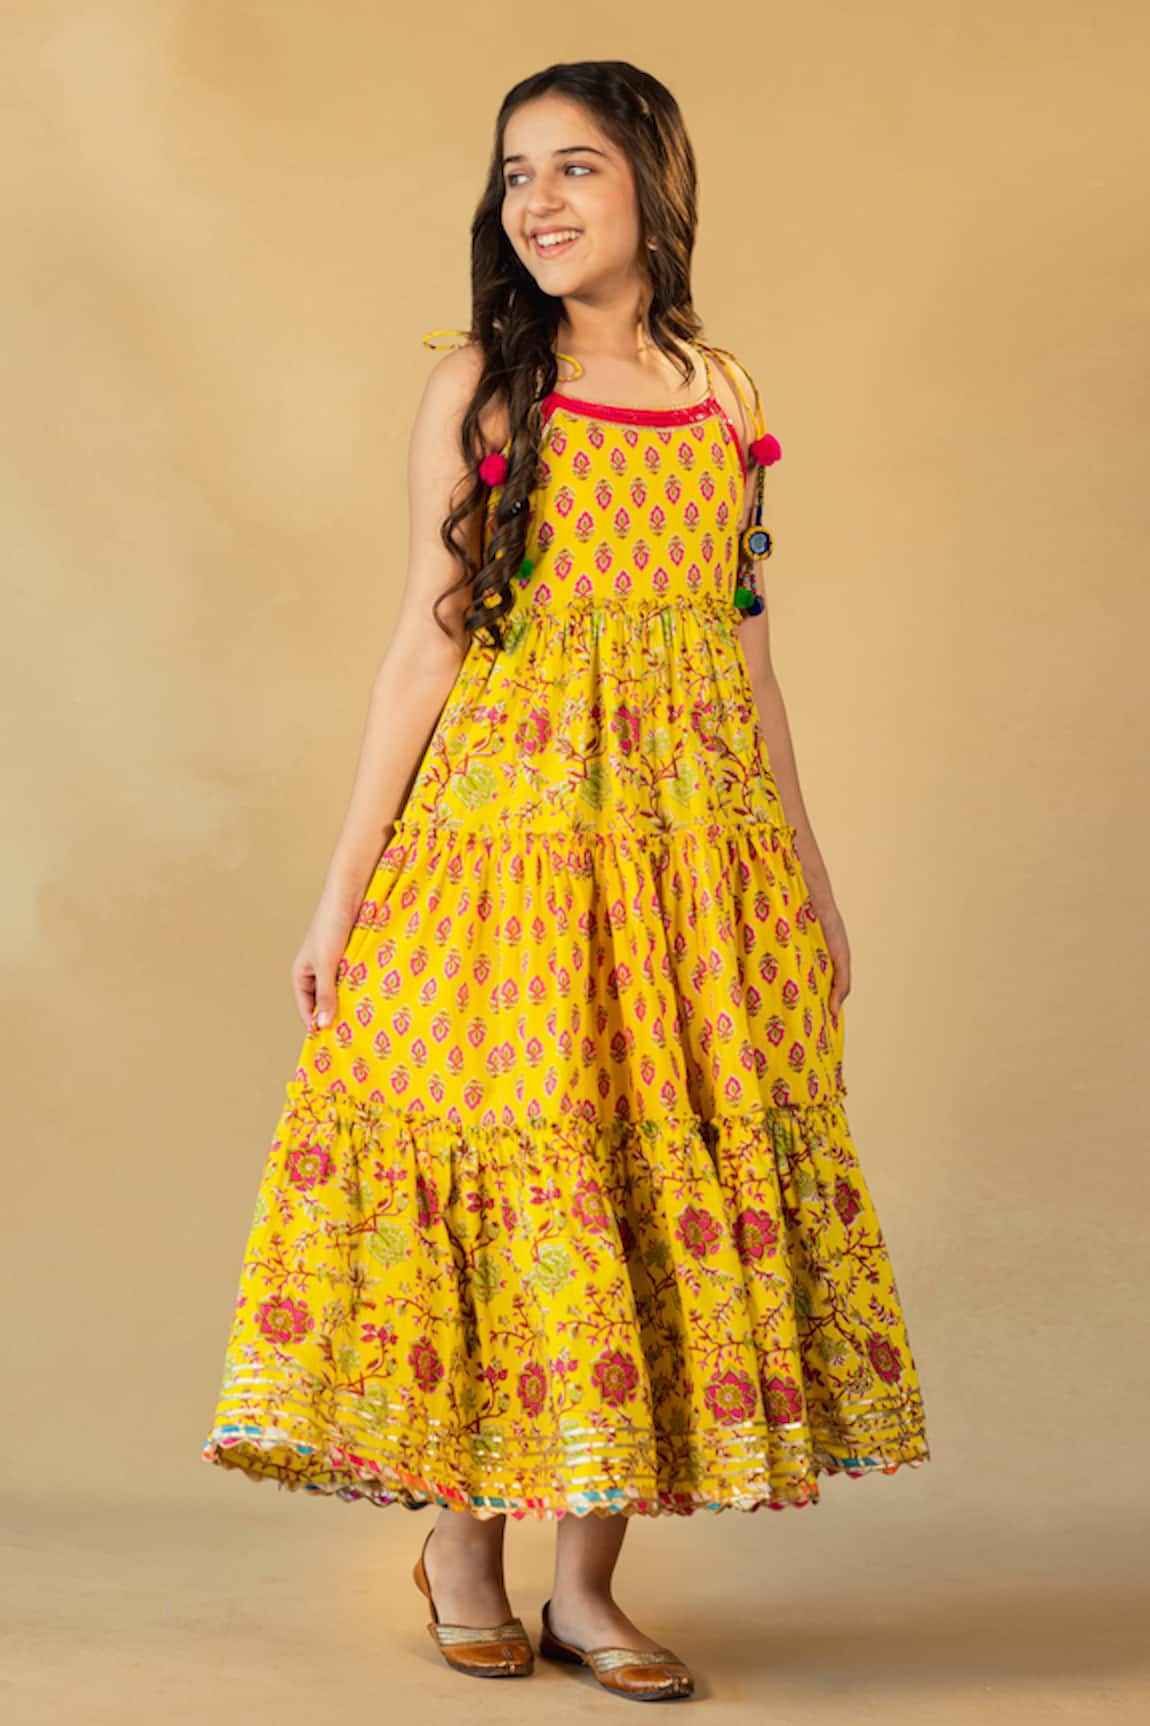 Buy trendy girl dresses for Diwali online at Aza Fashions